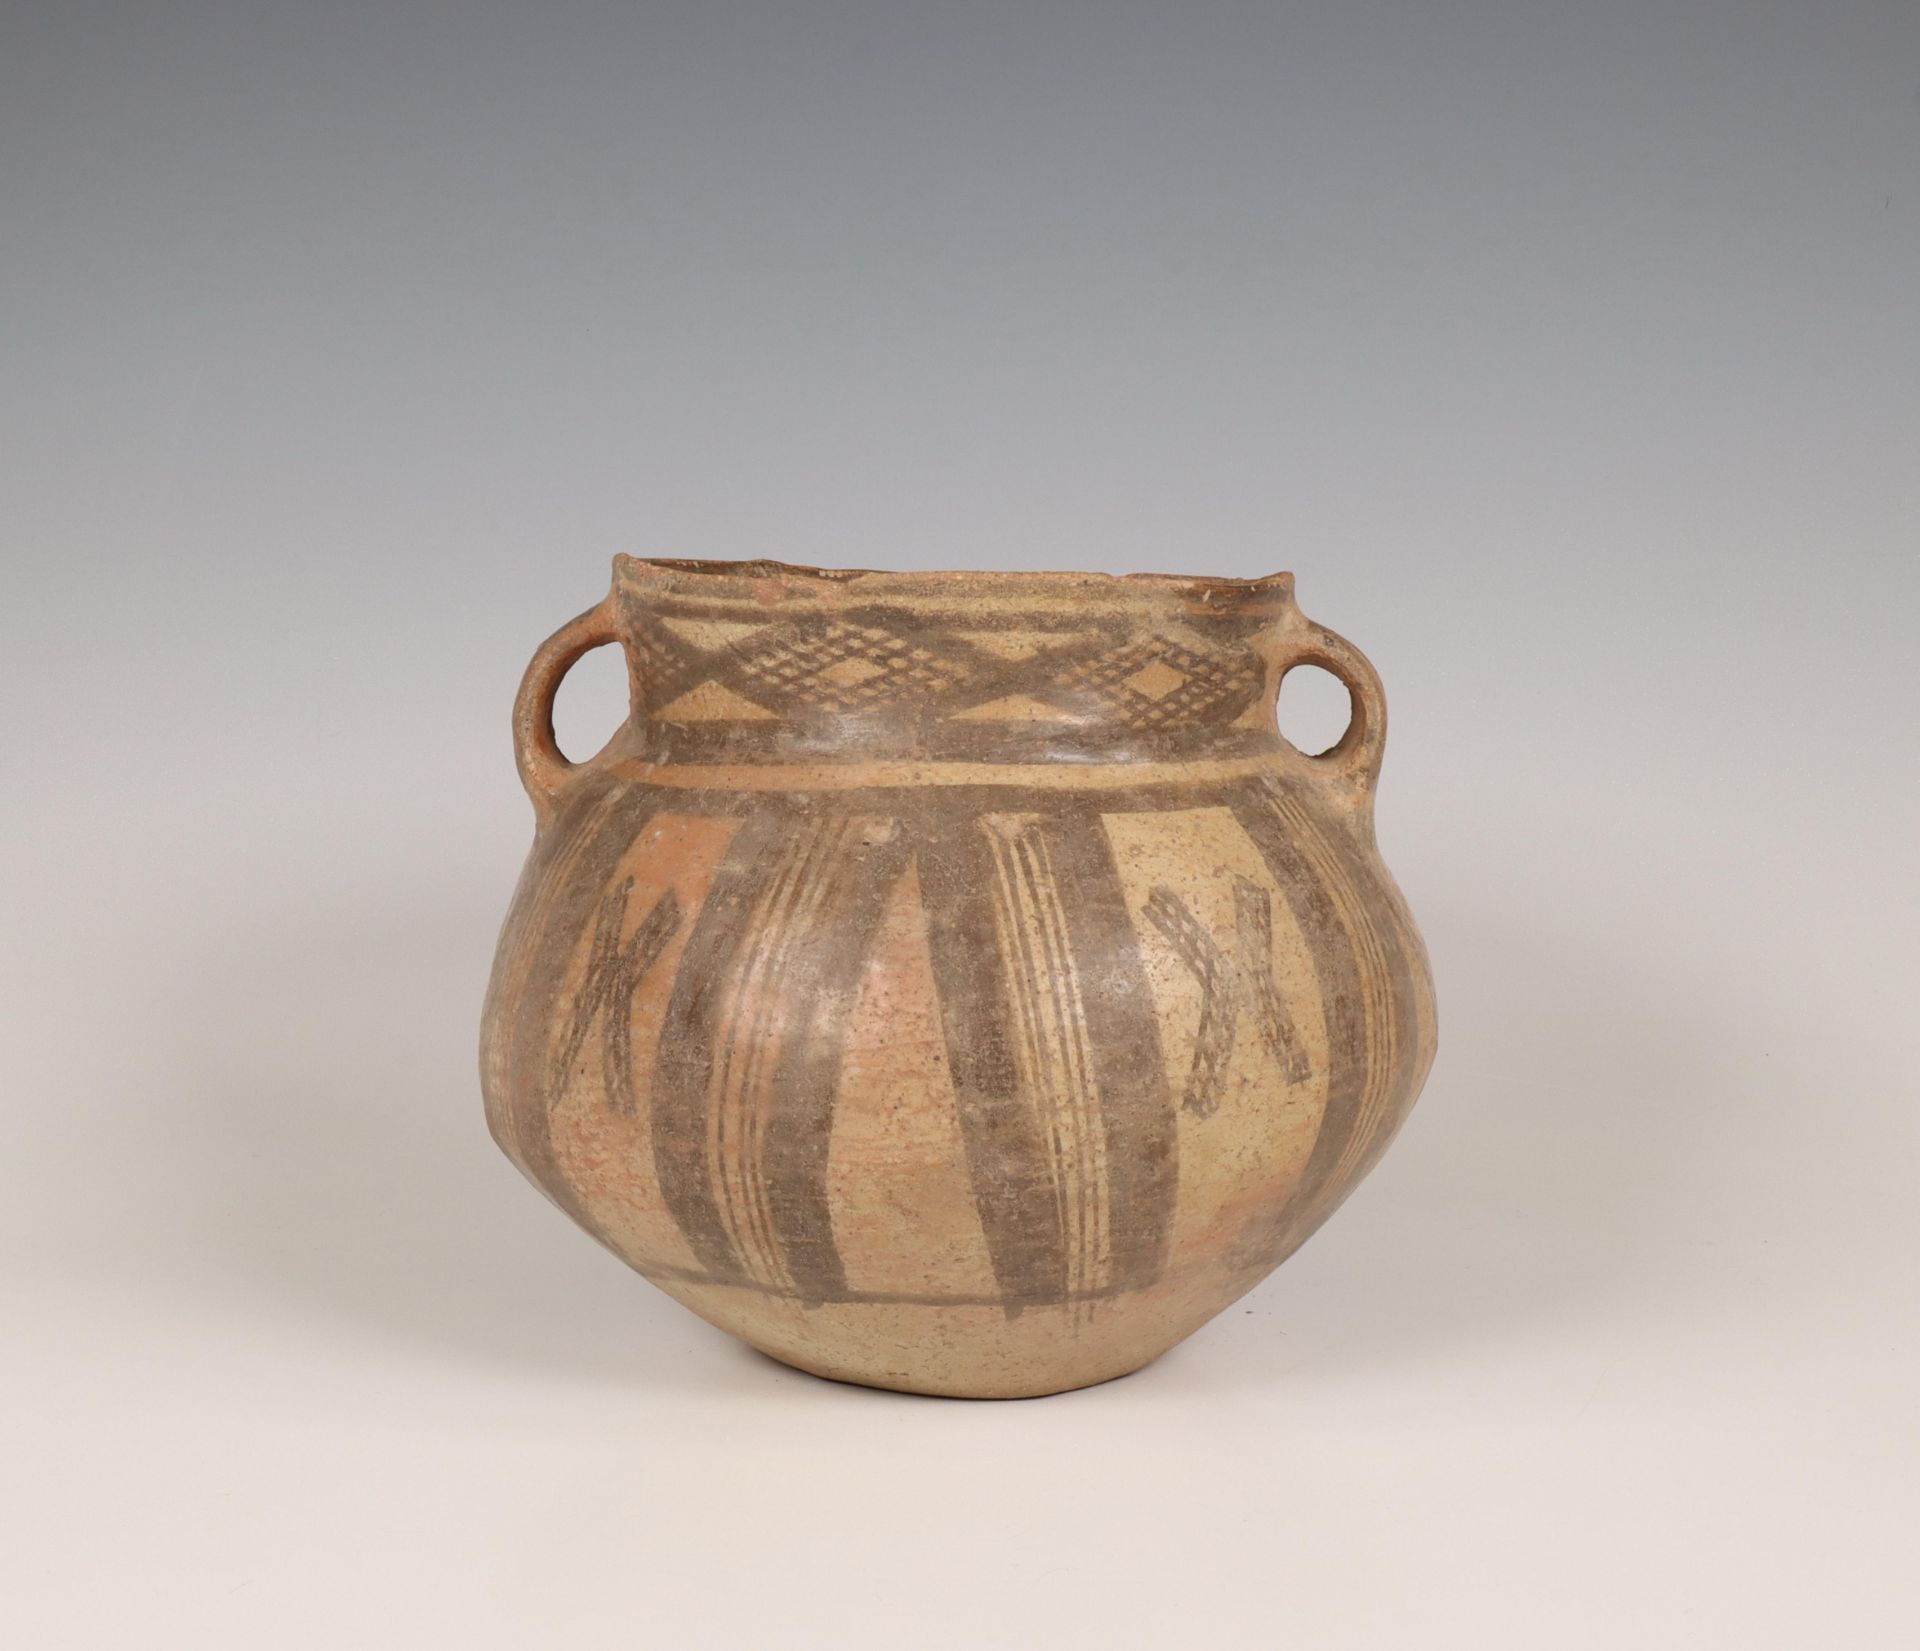 China, earthenware pot, Majiayao culture, Machang phase, late 3rd millennium BC, - Image 2 of 6